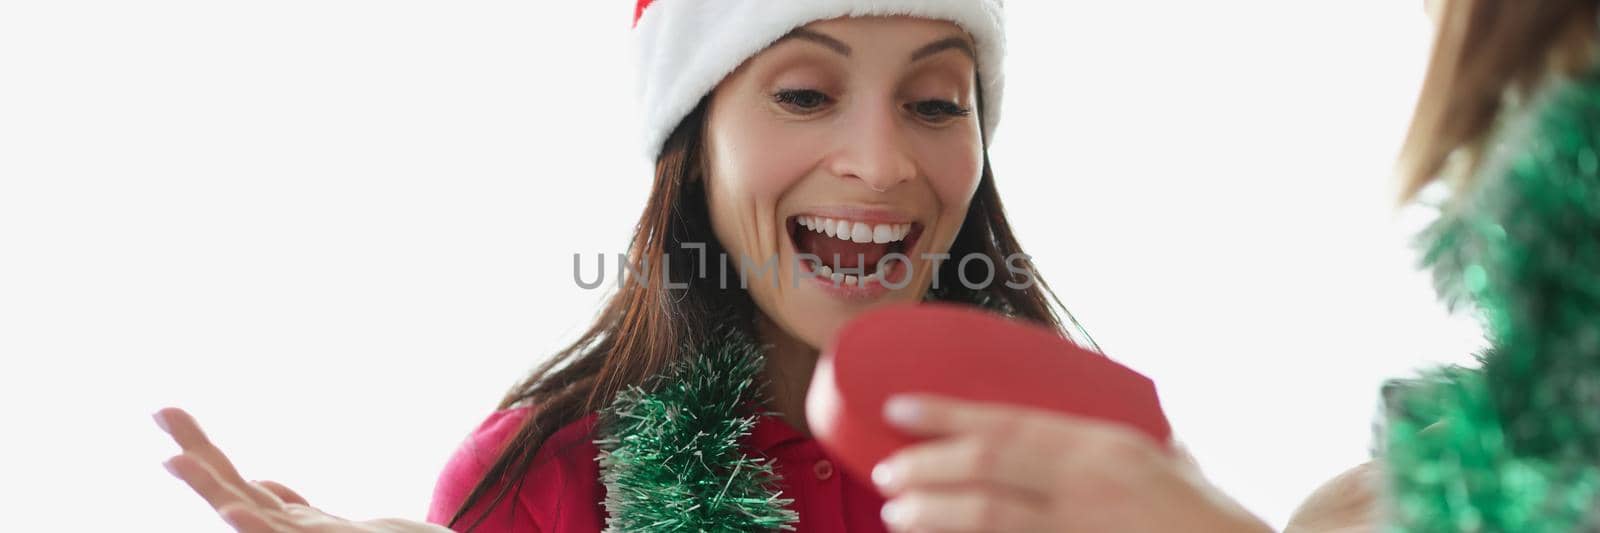 Portrait of pure emotion of surprise on womans face, shocked facial expression. Scream with happiness, got present from best friend or sister. Celebrating new year, christmas, winter holiday concept